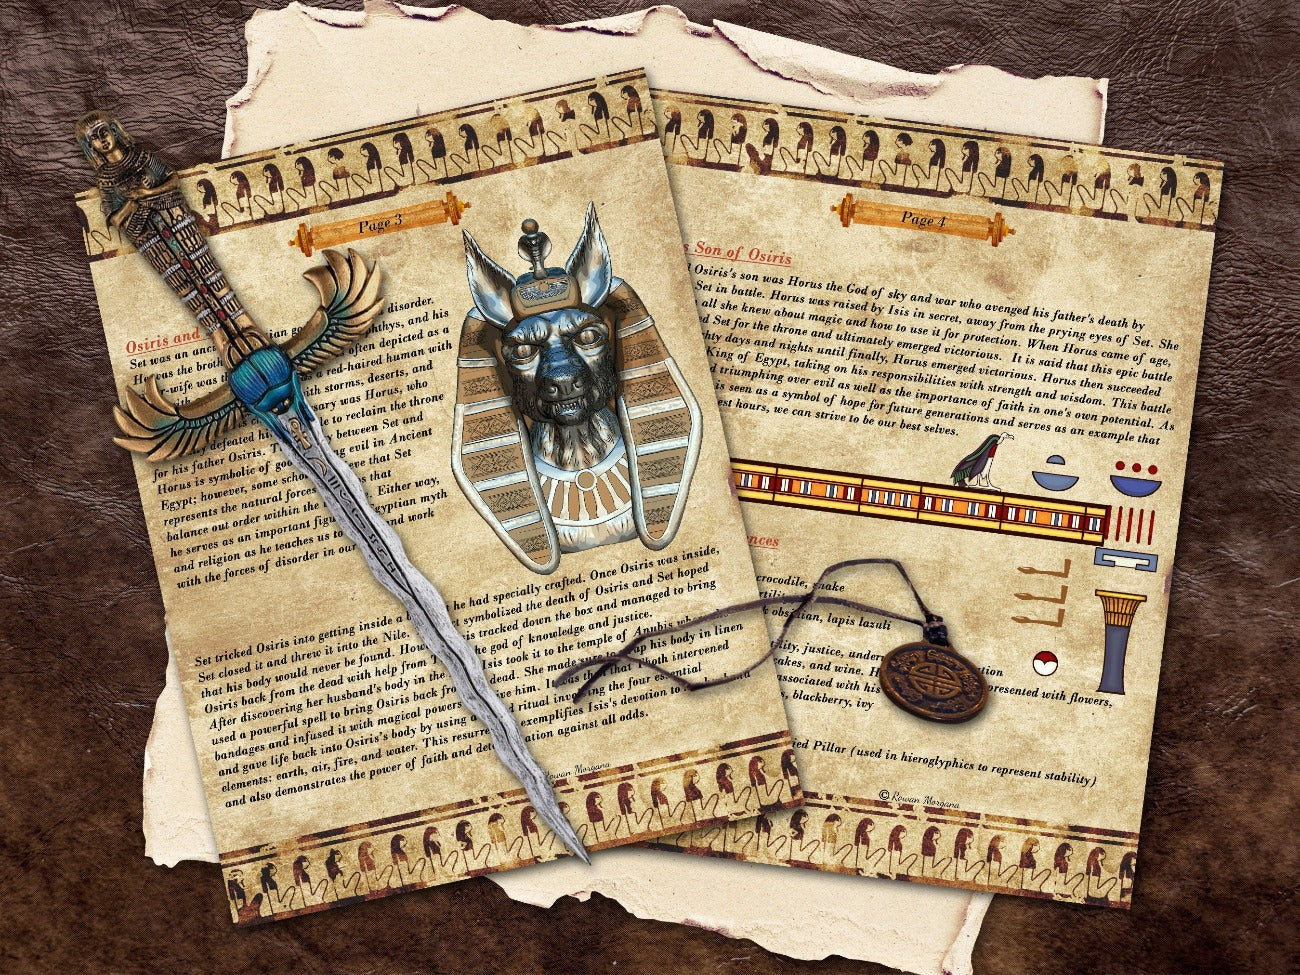 OSIRIS Egyptian God, 5 Pages, Egyptian Mythology Isis and Osiris, Auset Lord of the Underworld, Ancient Egypt Printable Witchcraft Grimoire - Morgana Magick Spell